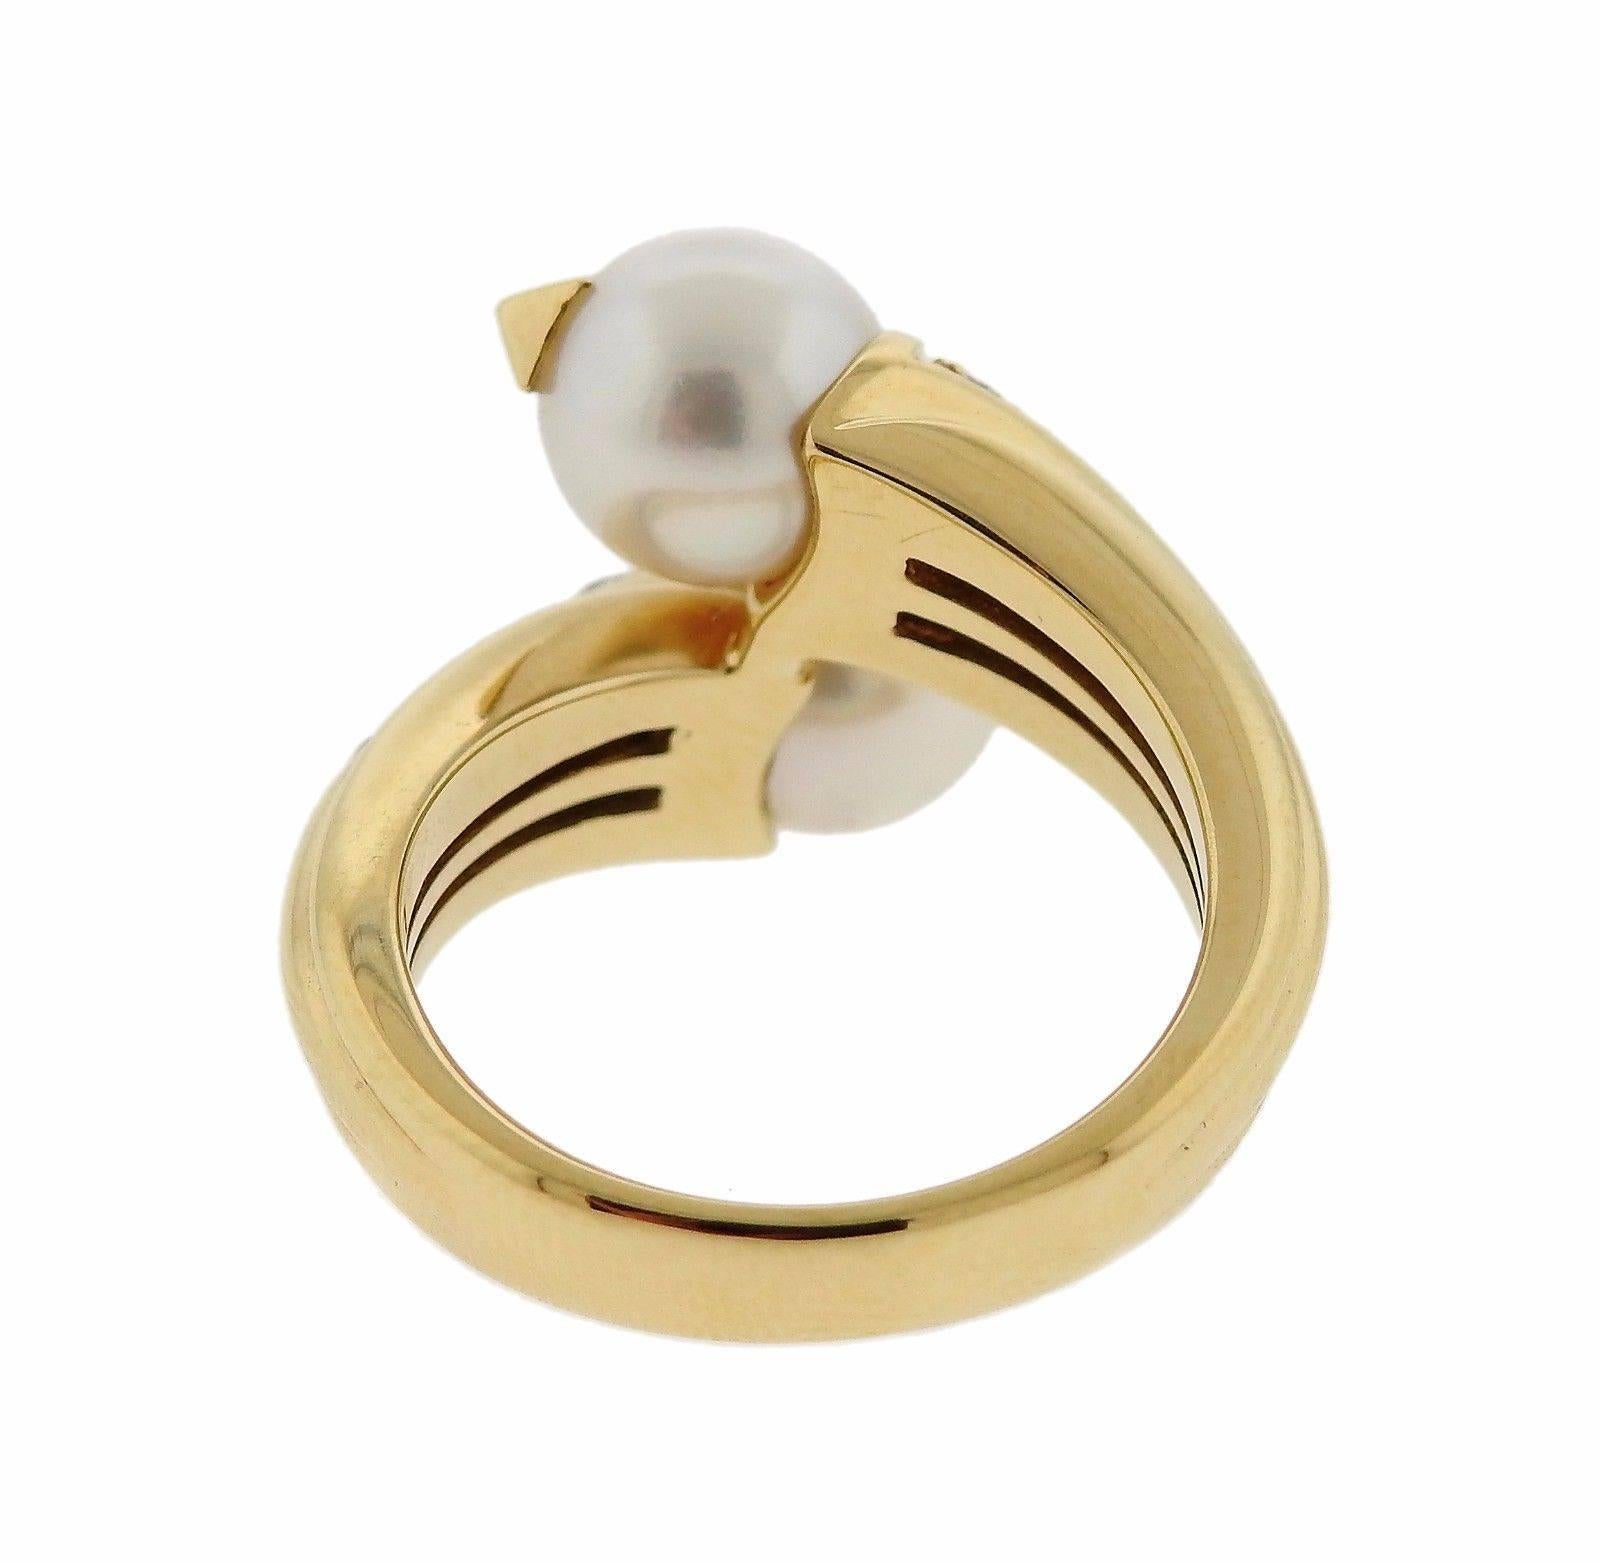 An 18k gold bypass ring by set with 7.4mm pearls and approximately 0.16ctw of G/VS diamonds.  The ring is a size 5.5 and the ring top is 16mm wide.  The weight of the piece is 8.3 grams.  Marked: Bvlgari, 750, Italian mark.